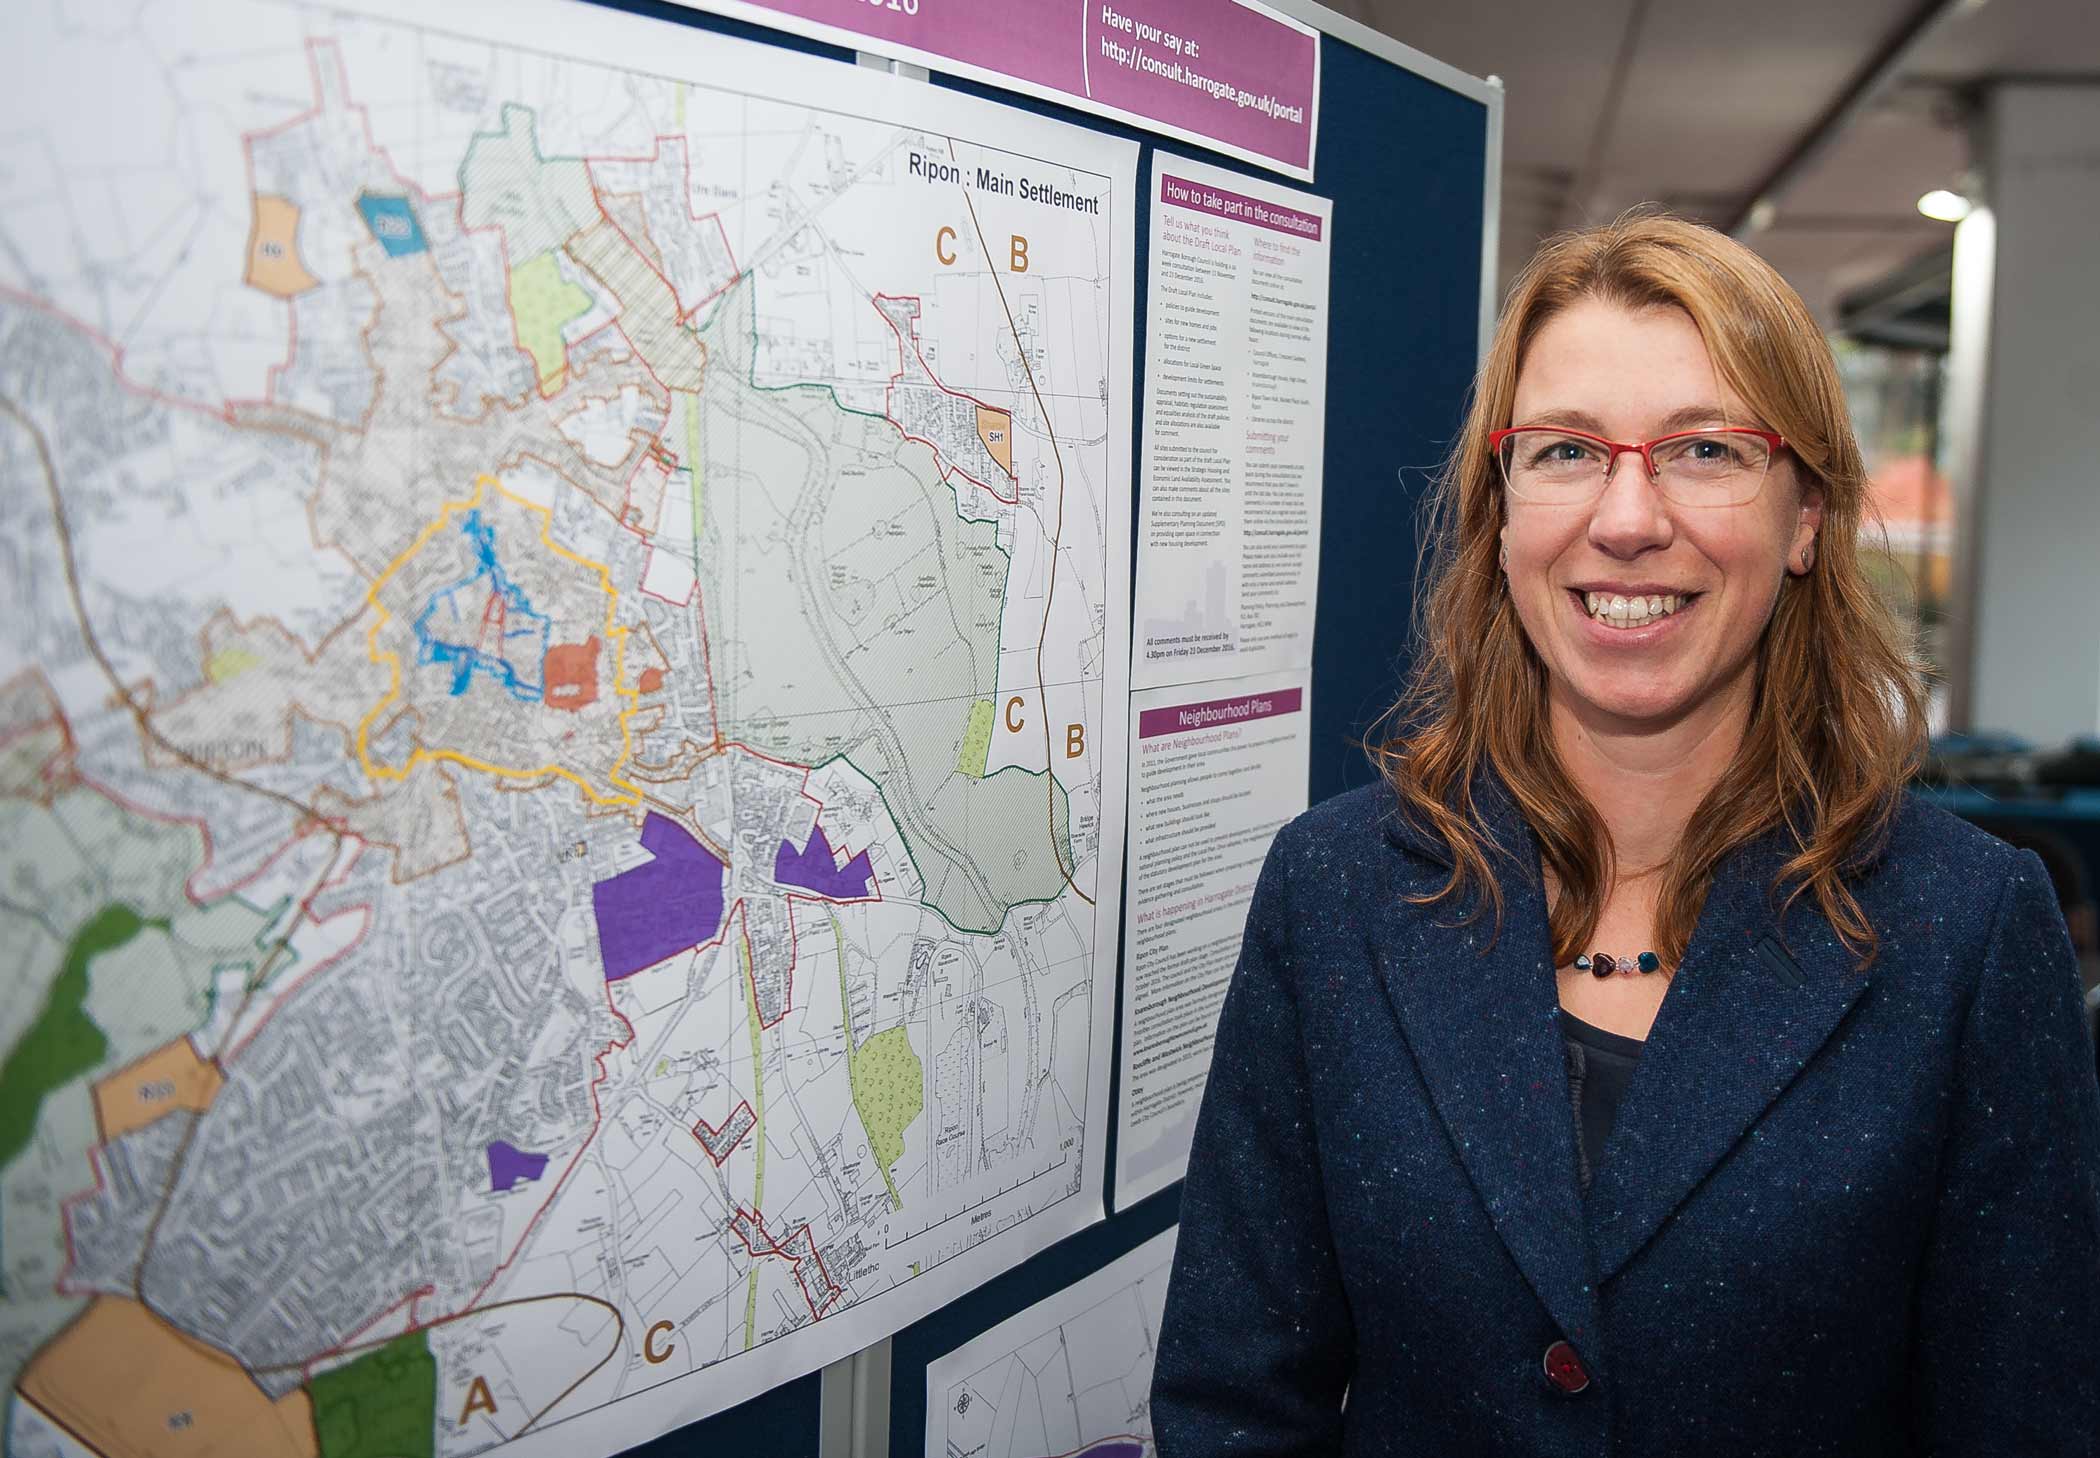 Harrogate Borough Council's Principle Planning Policy Manager is Tracey Rathmell